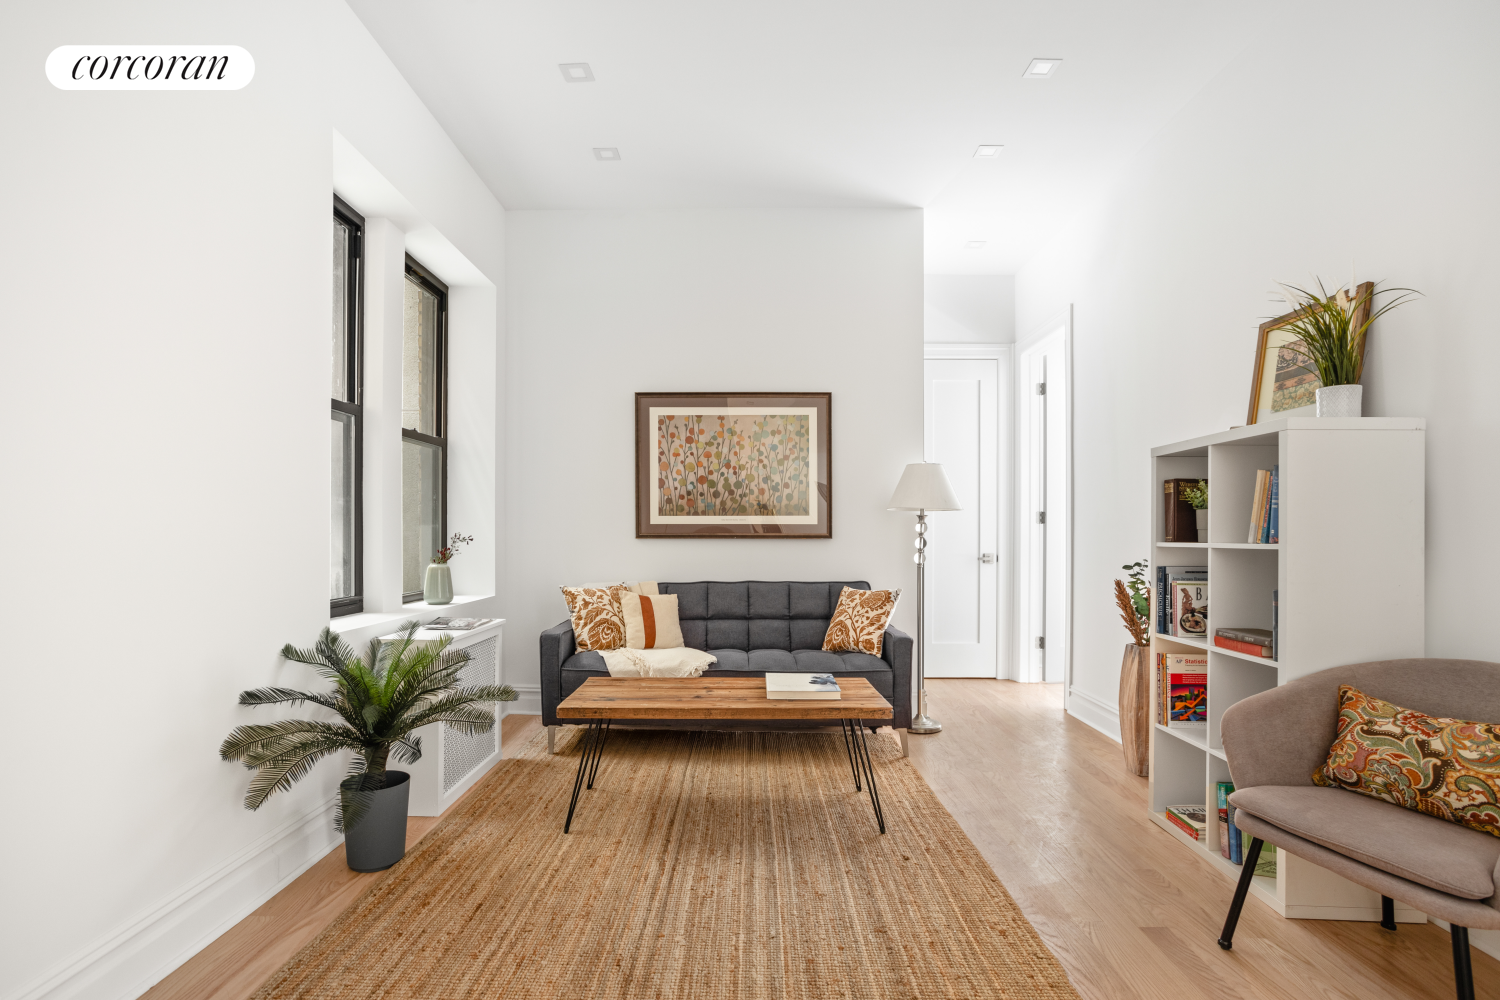 925 Union Street 1A, Park Slope, Brooklyn, New York - 2 Bedrooms  
1 Bathrooms  
4 Rooms - 